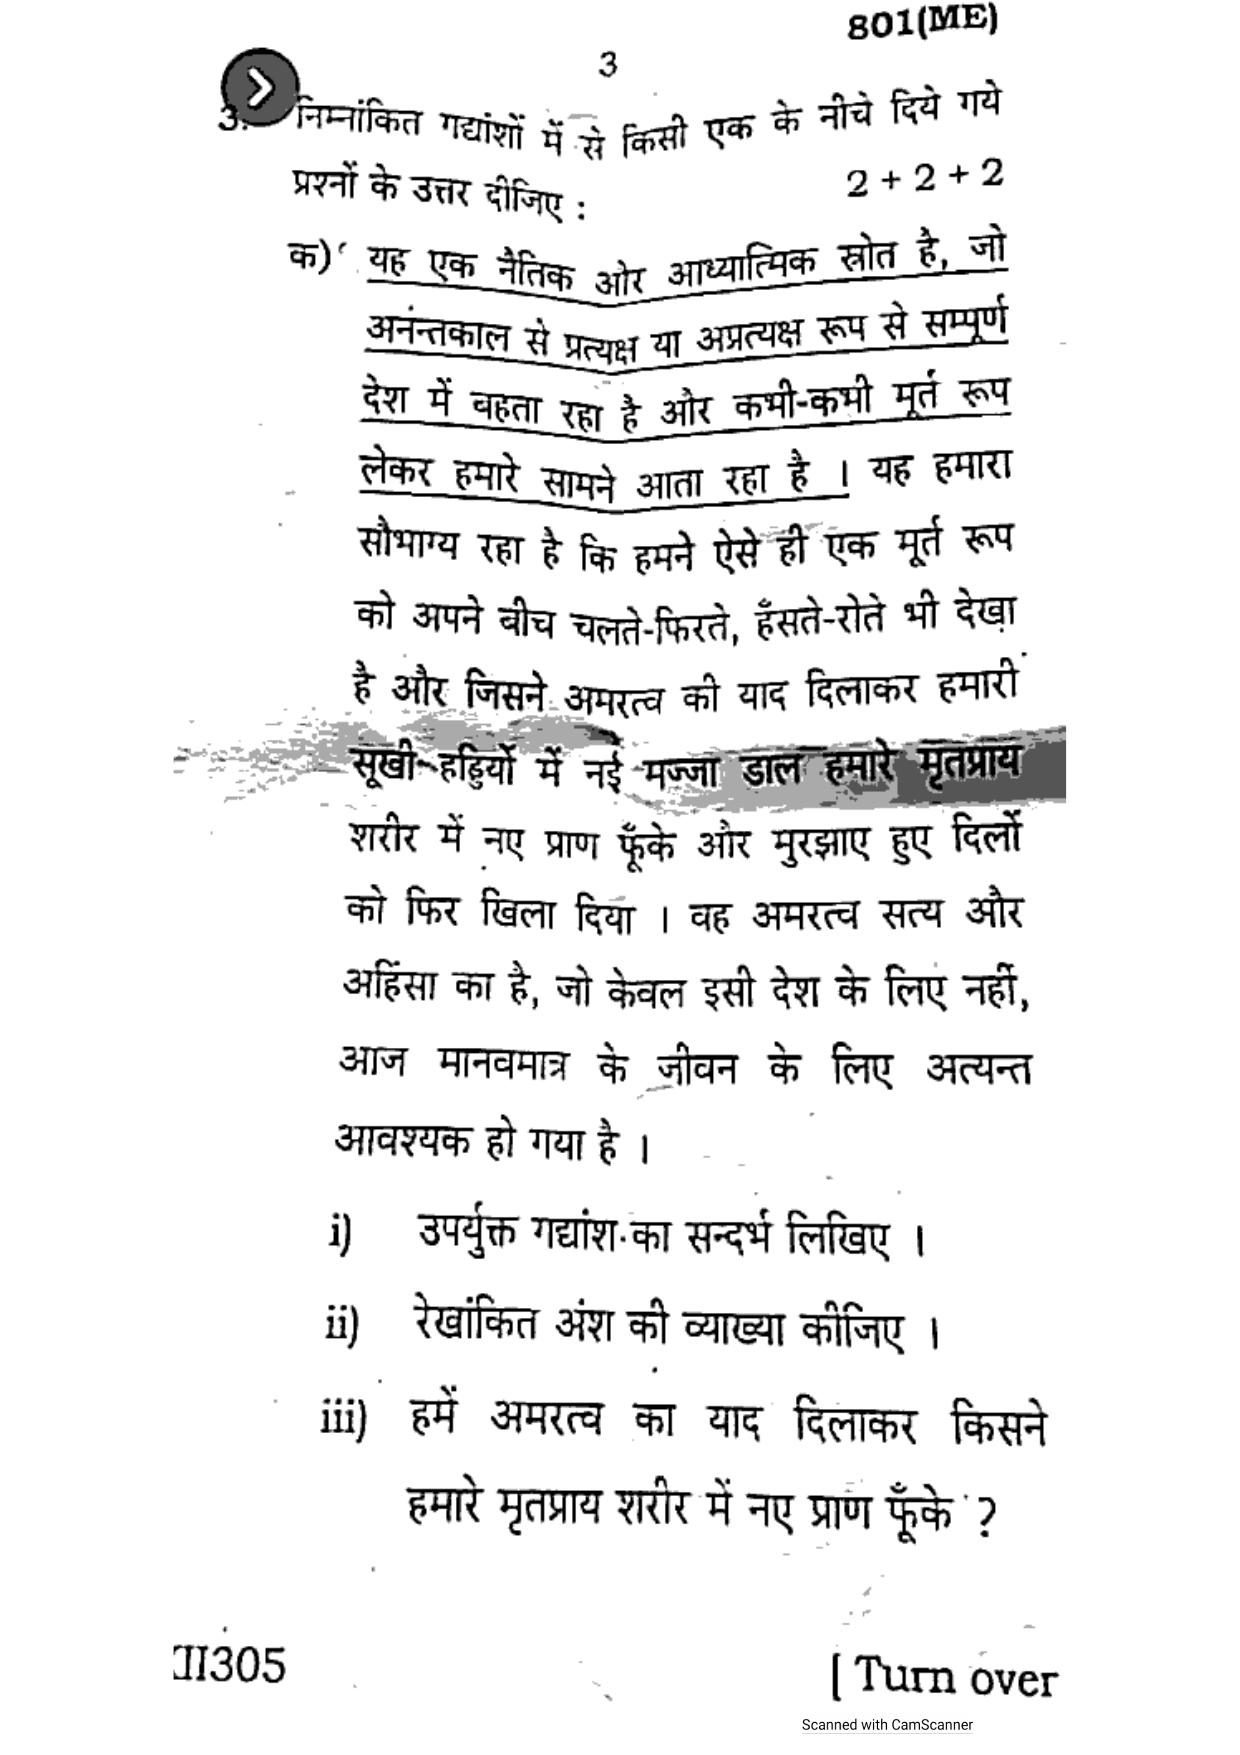 UP Board Previous Year Question Paper Class 10 Hindi (801 ME) – 2020 - Page 3